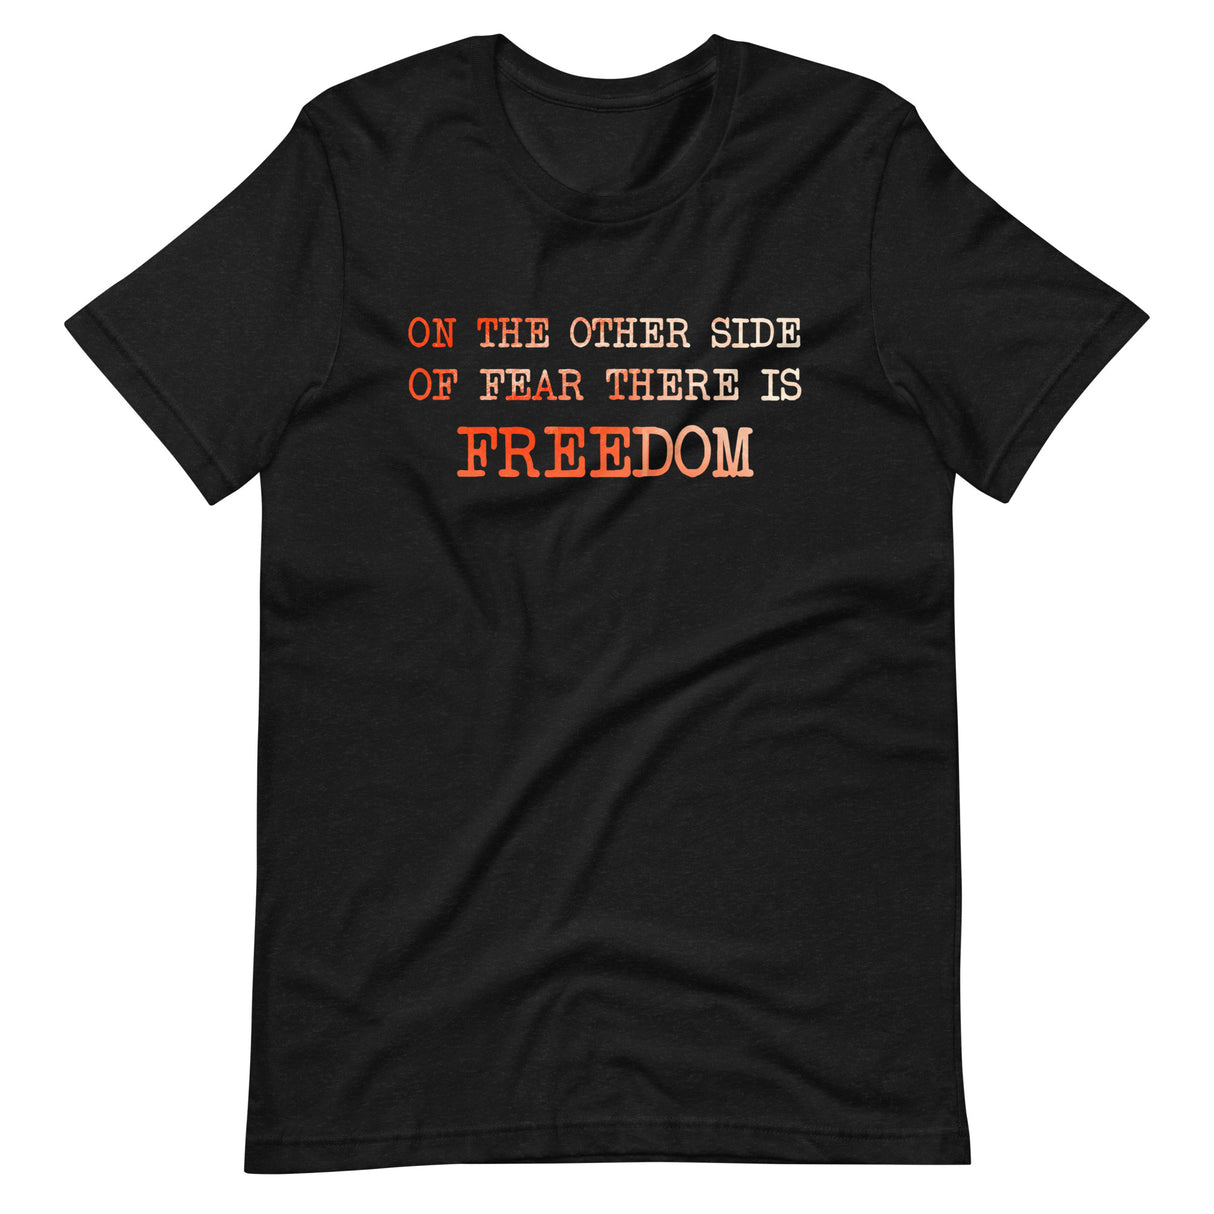 On The Other Side of Fear is Freedom Premium Shirt